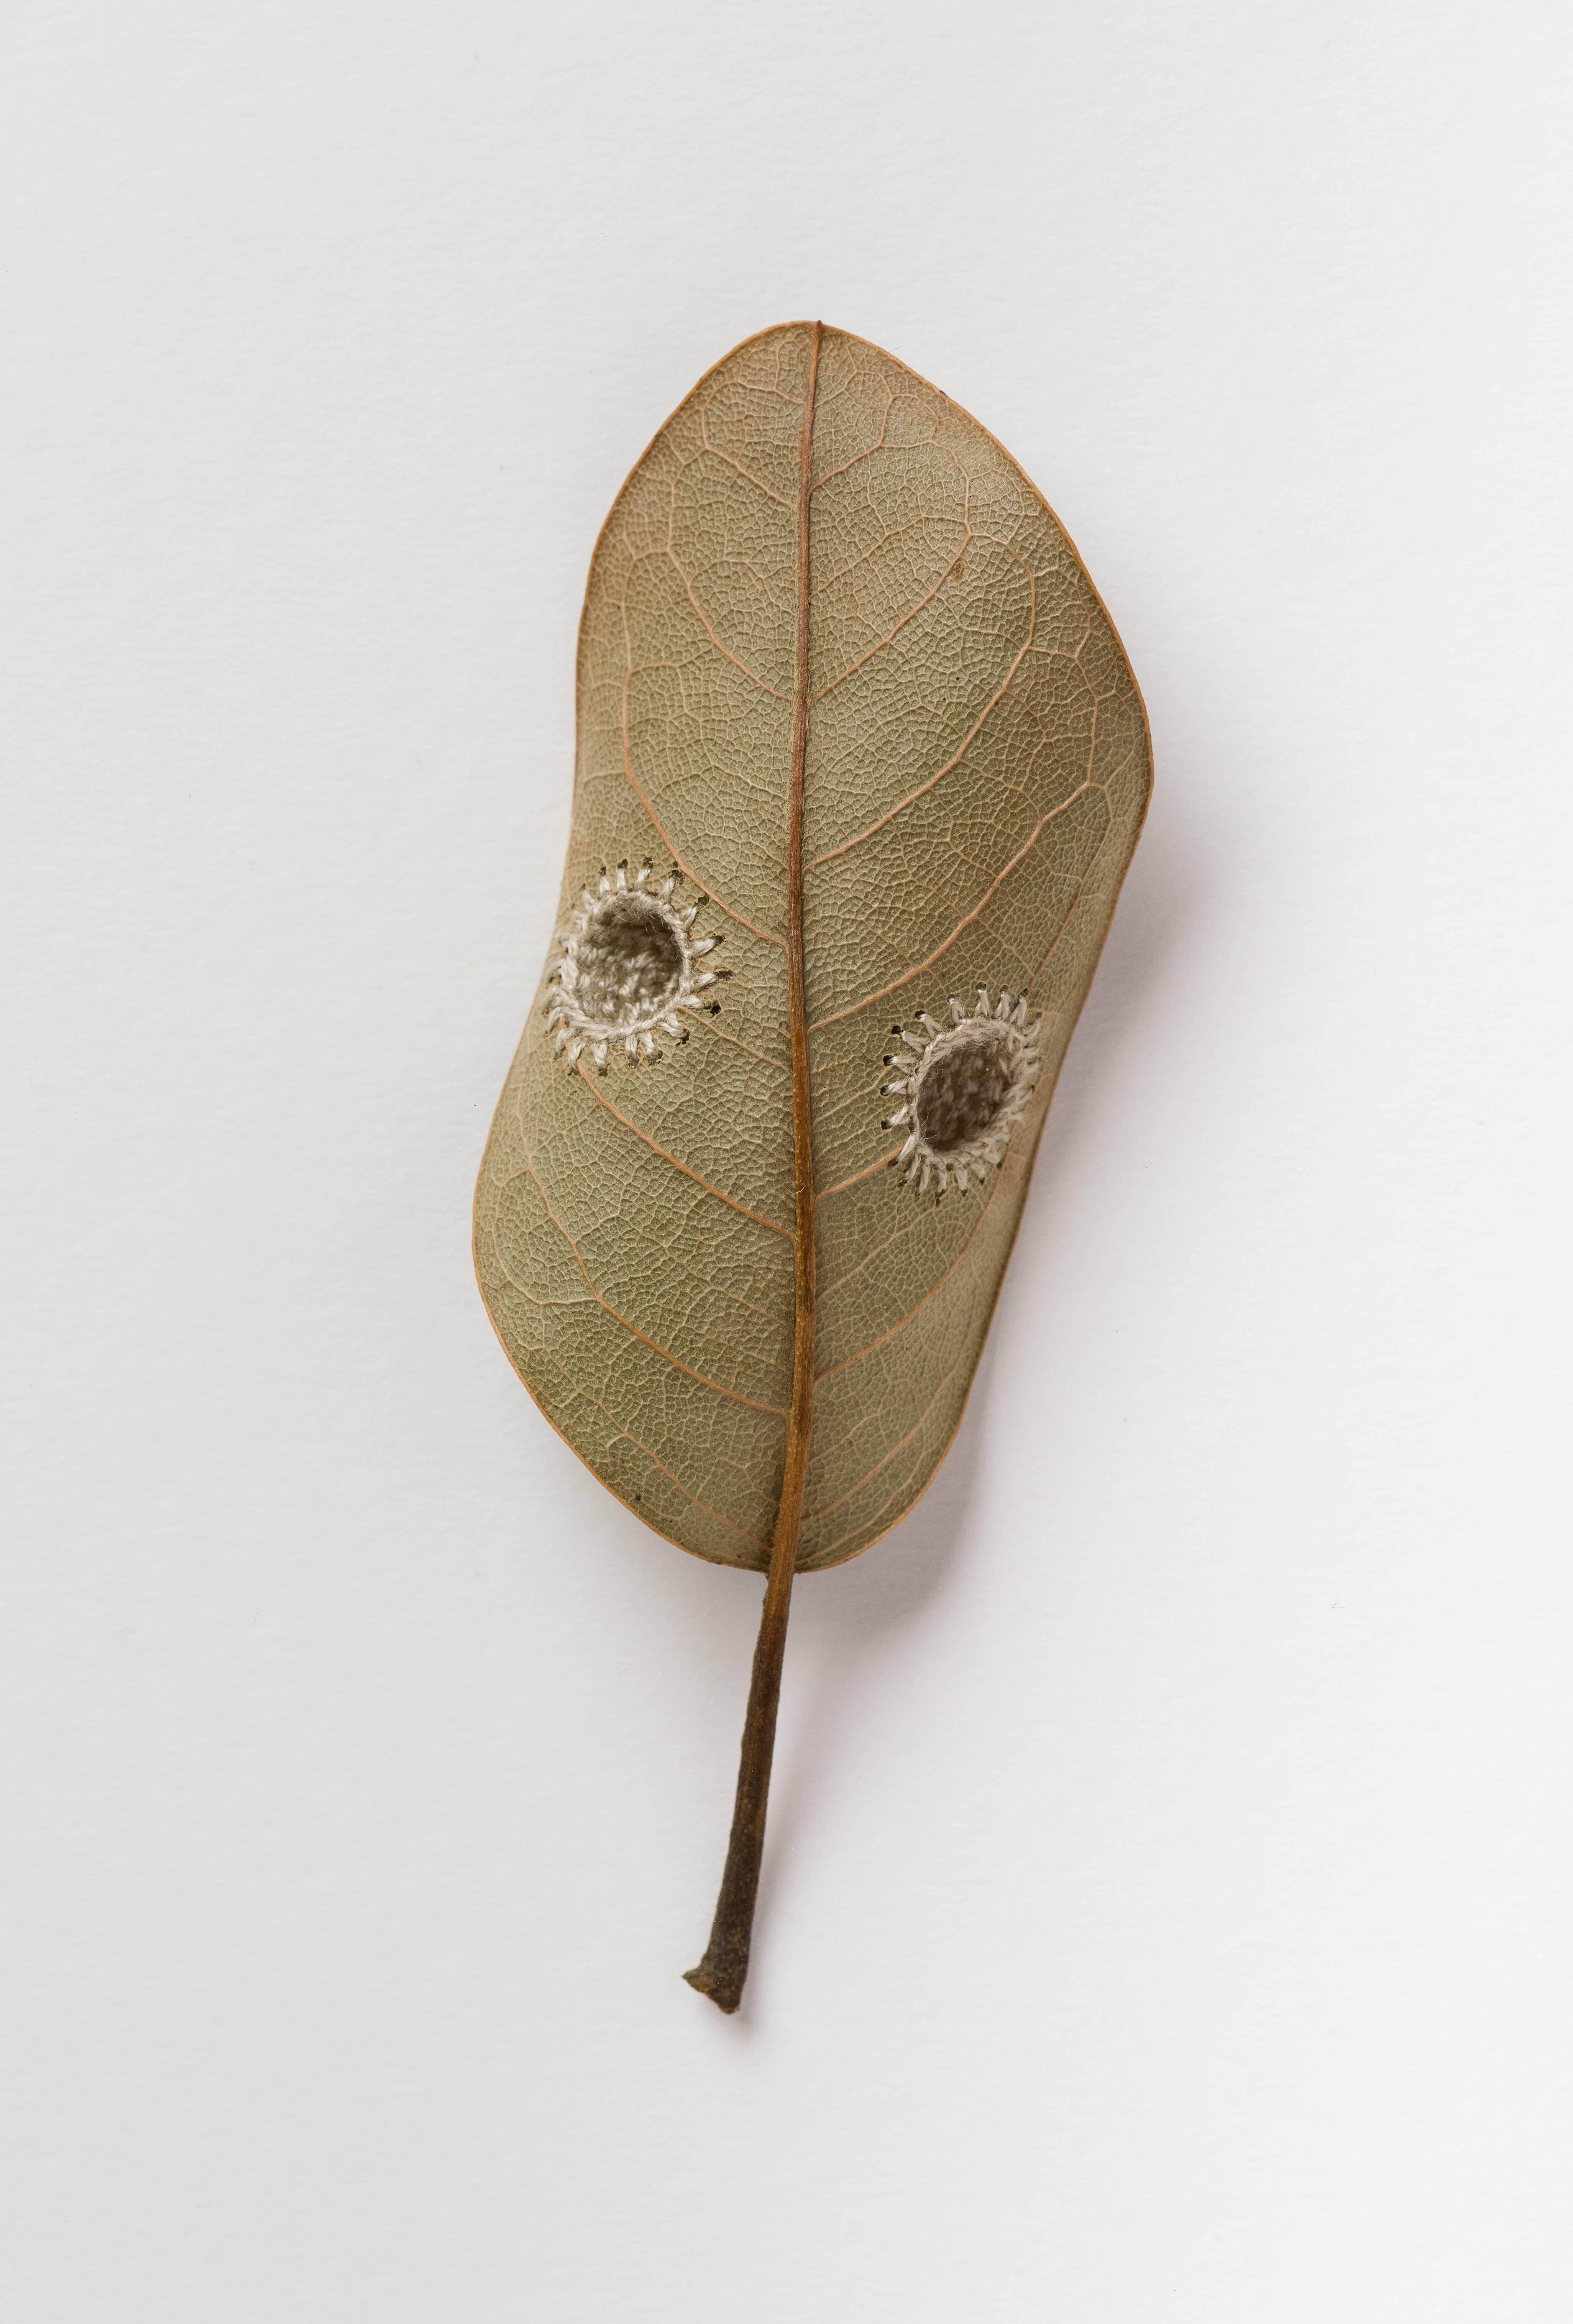 Item description:
Susanna Bauer
Collection
Platanus, Magnolia, Ginkgo leaves, cotton yarn on paper
15 x 15 inches
2018

Framed in natural wood  white bleached color with museum glass

Susanna Bauer is a German mid career leaf artist based in the UK.